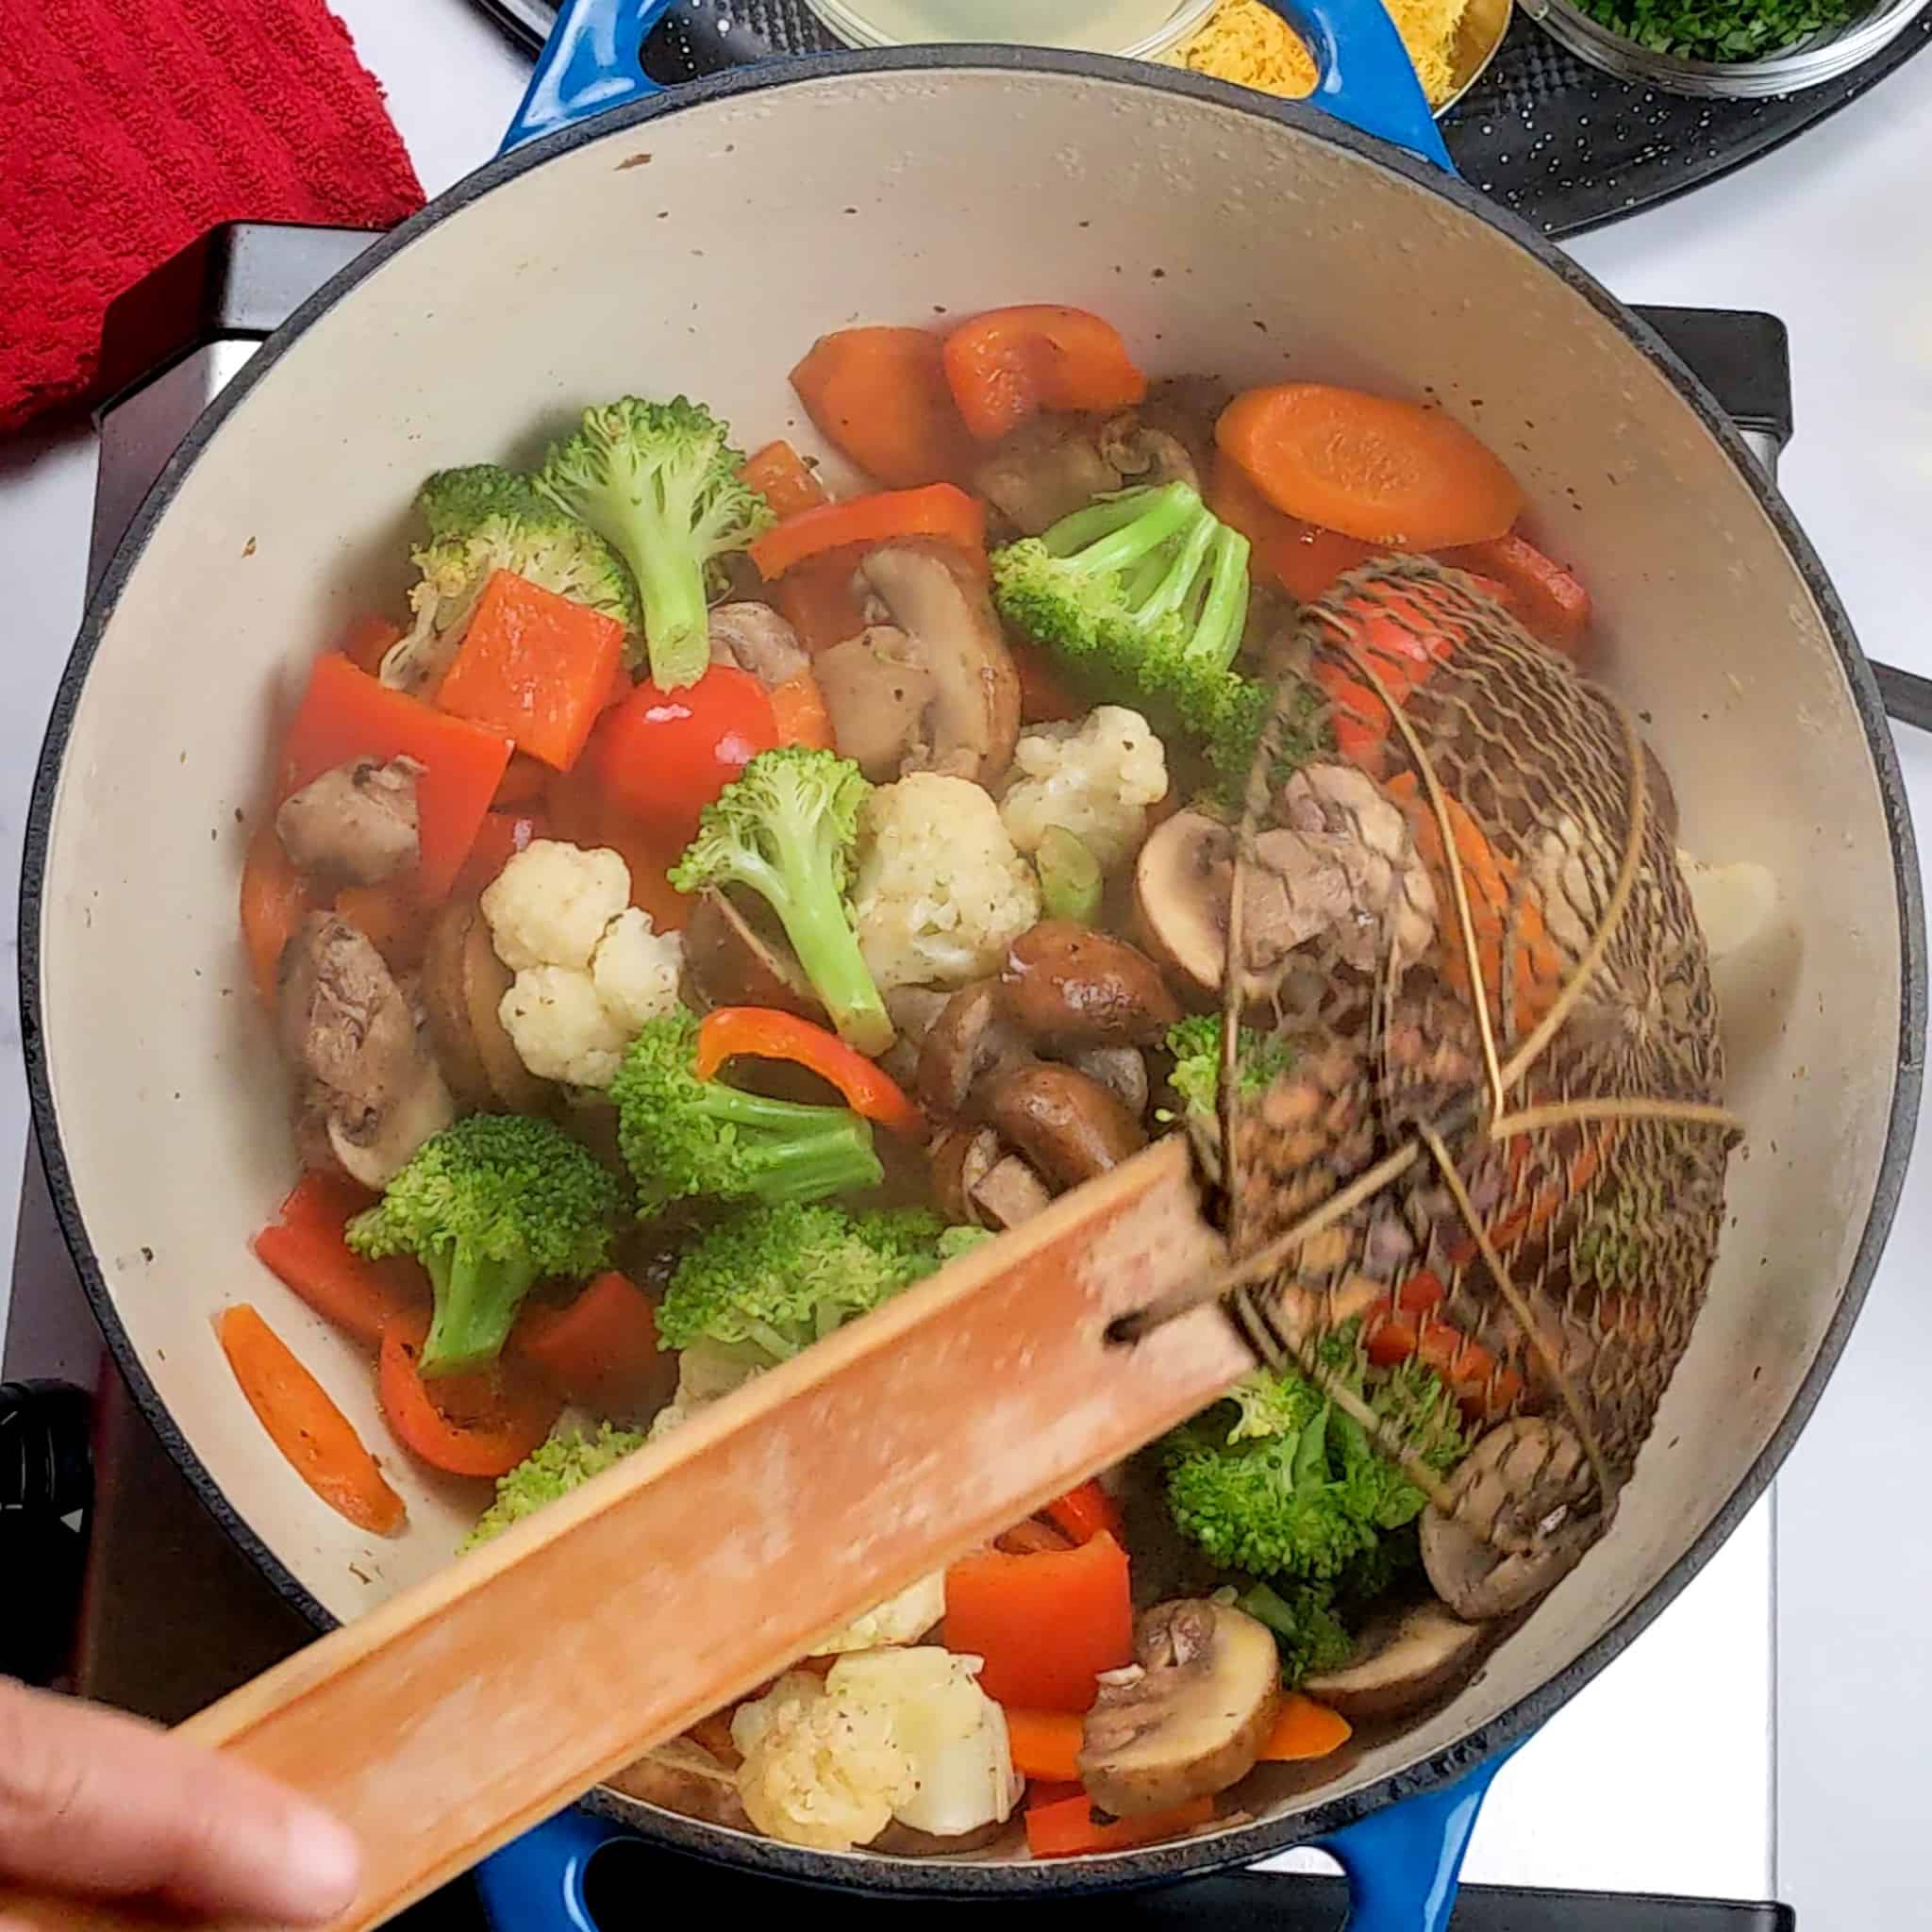 a wide wire strainer removing vegetables from the Dutch oven